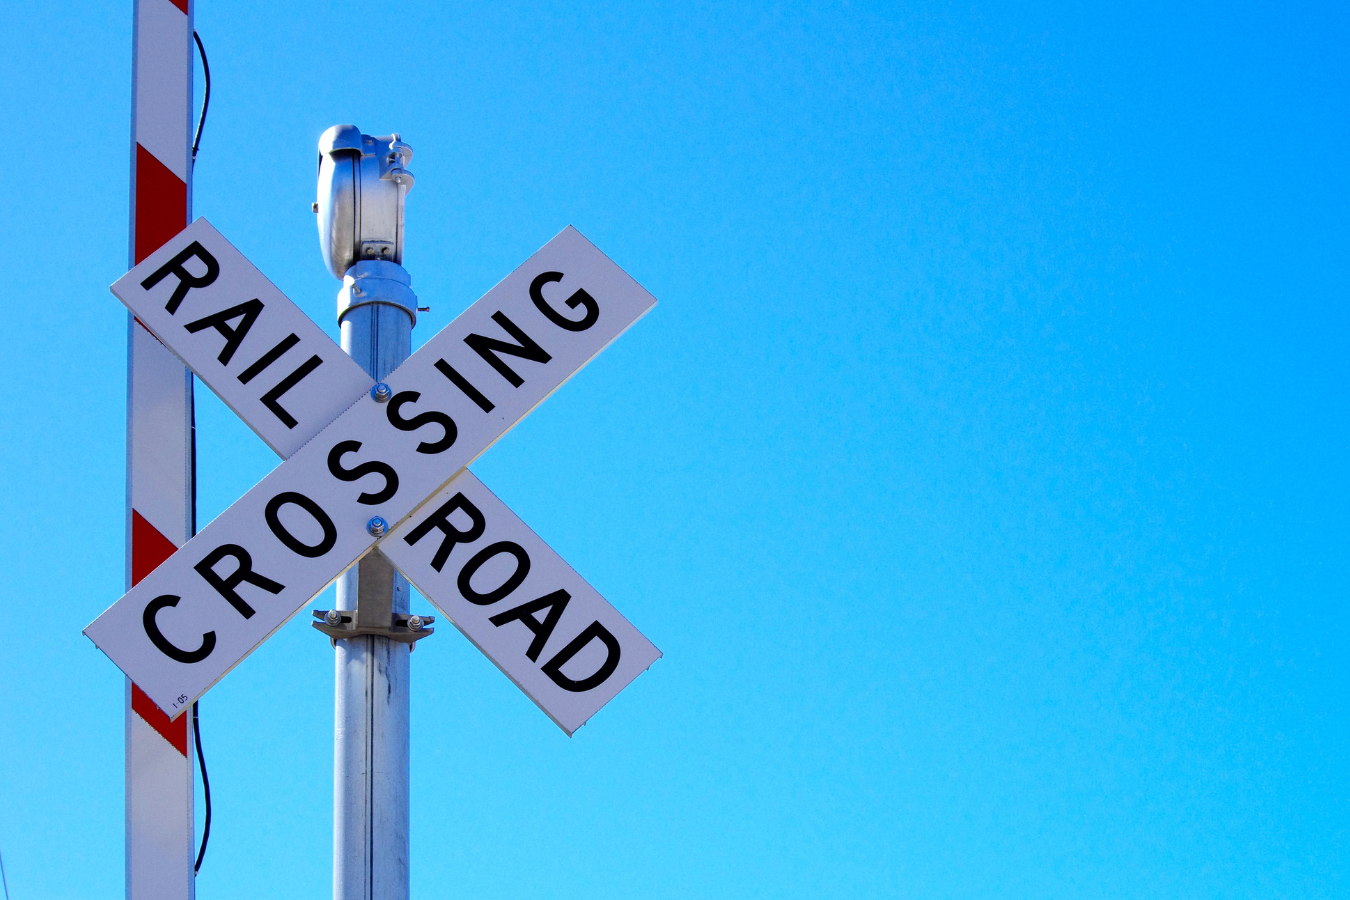 Traffic Sign: Parallel Railroad Crossing (T-Intersection)